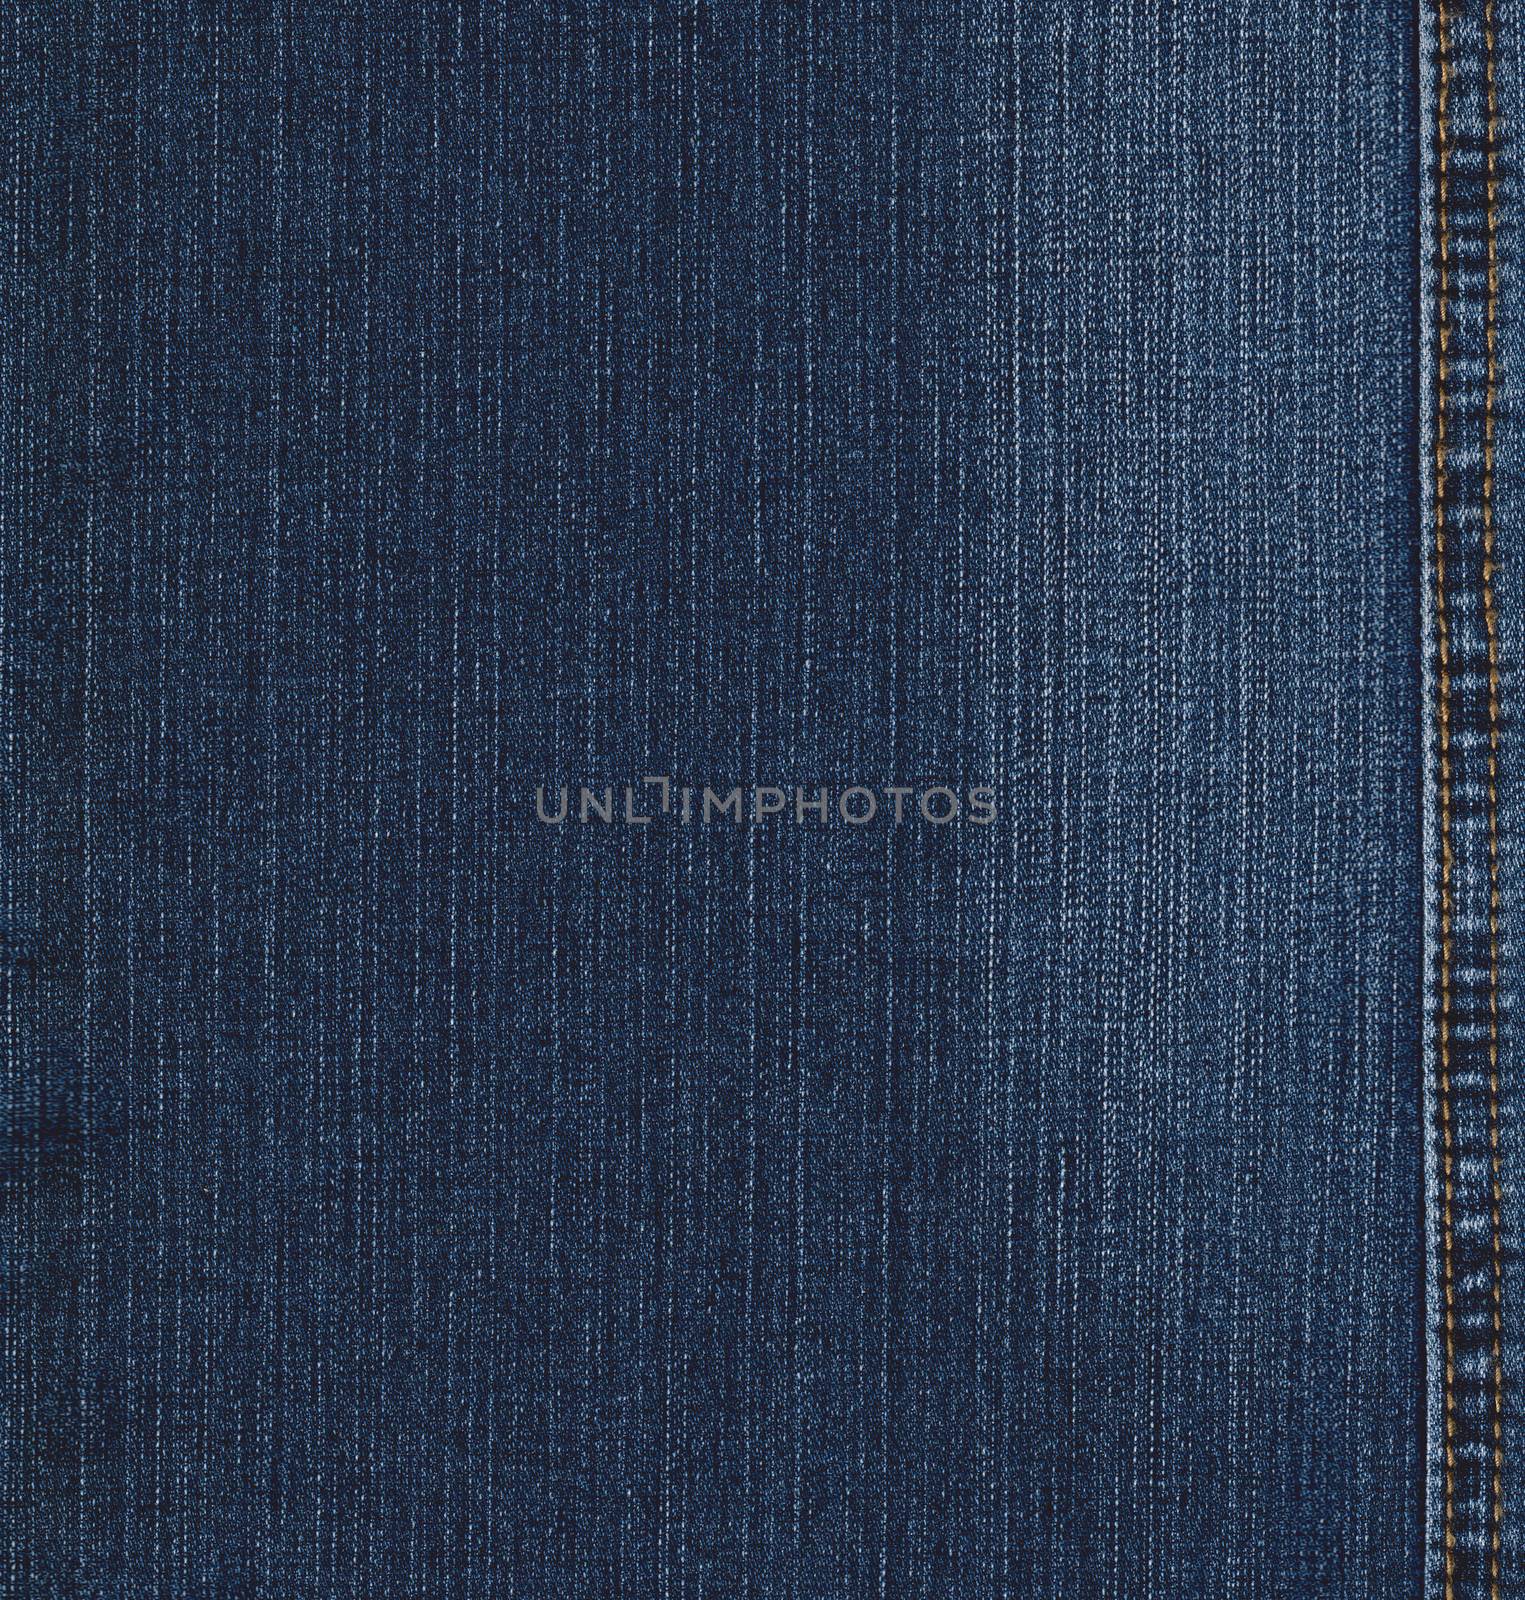 Real blue jeans denim texture, background with stitch